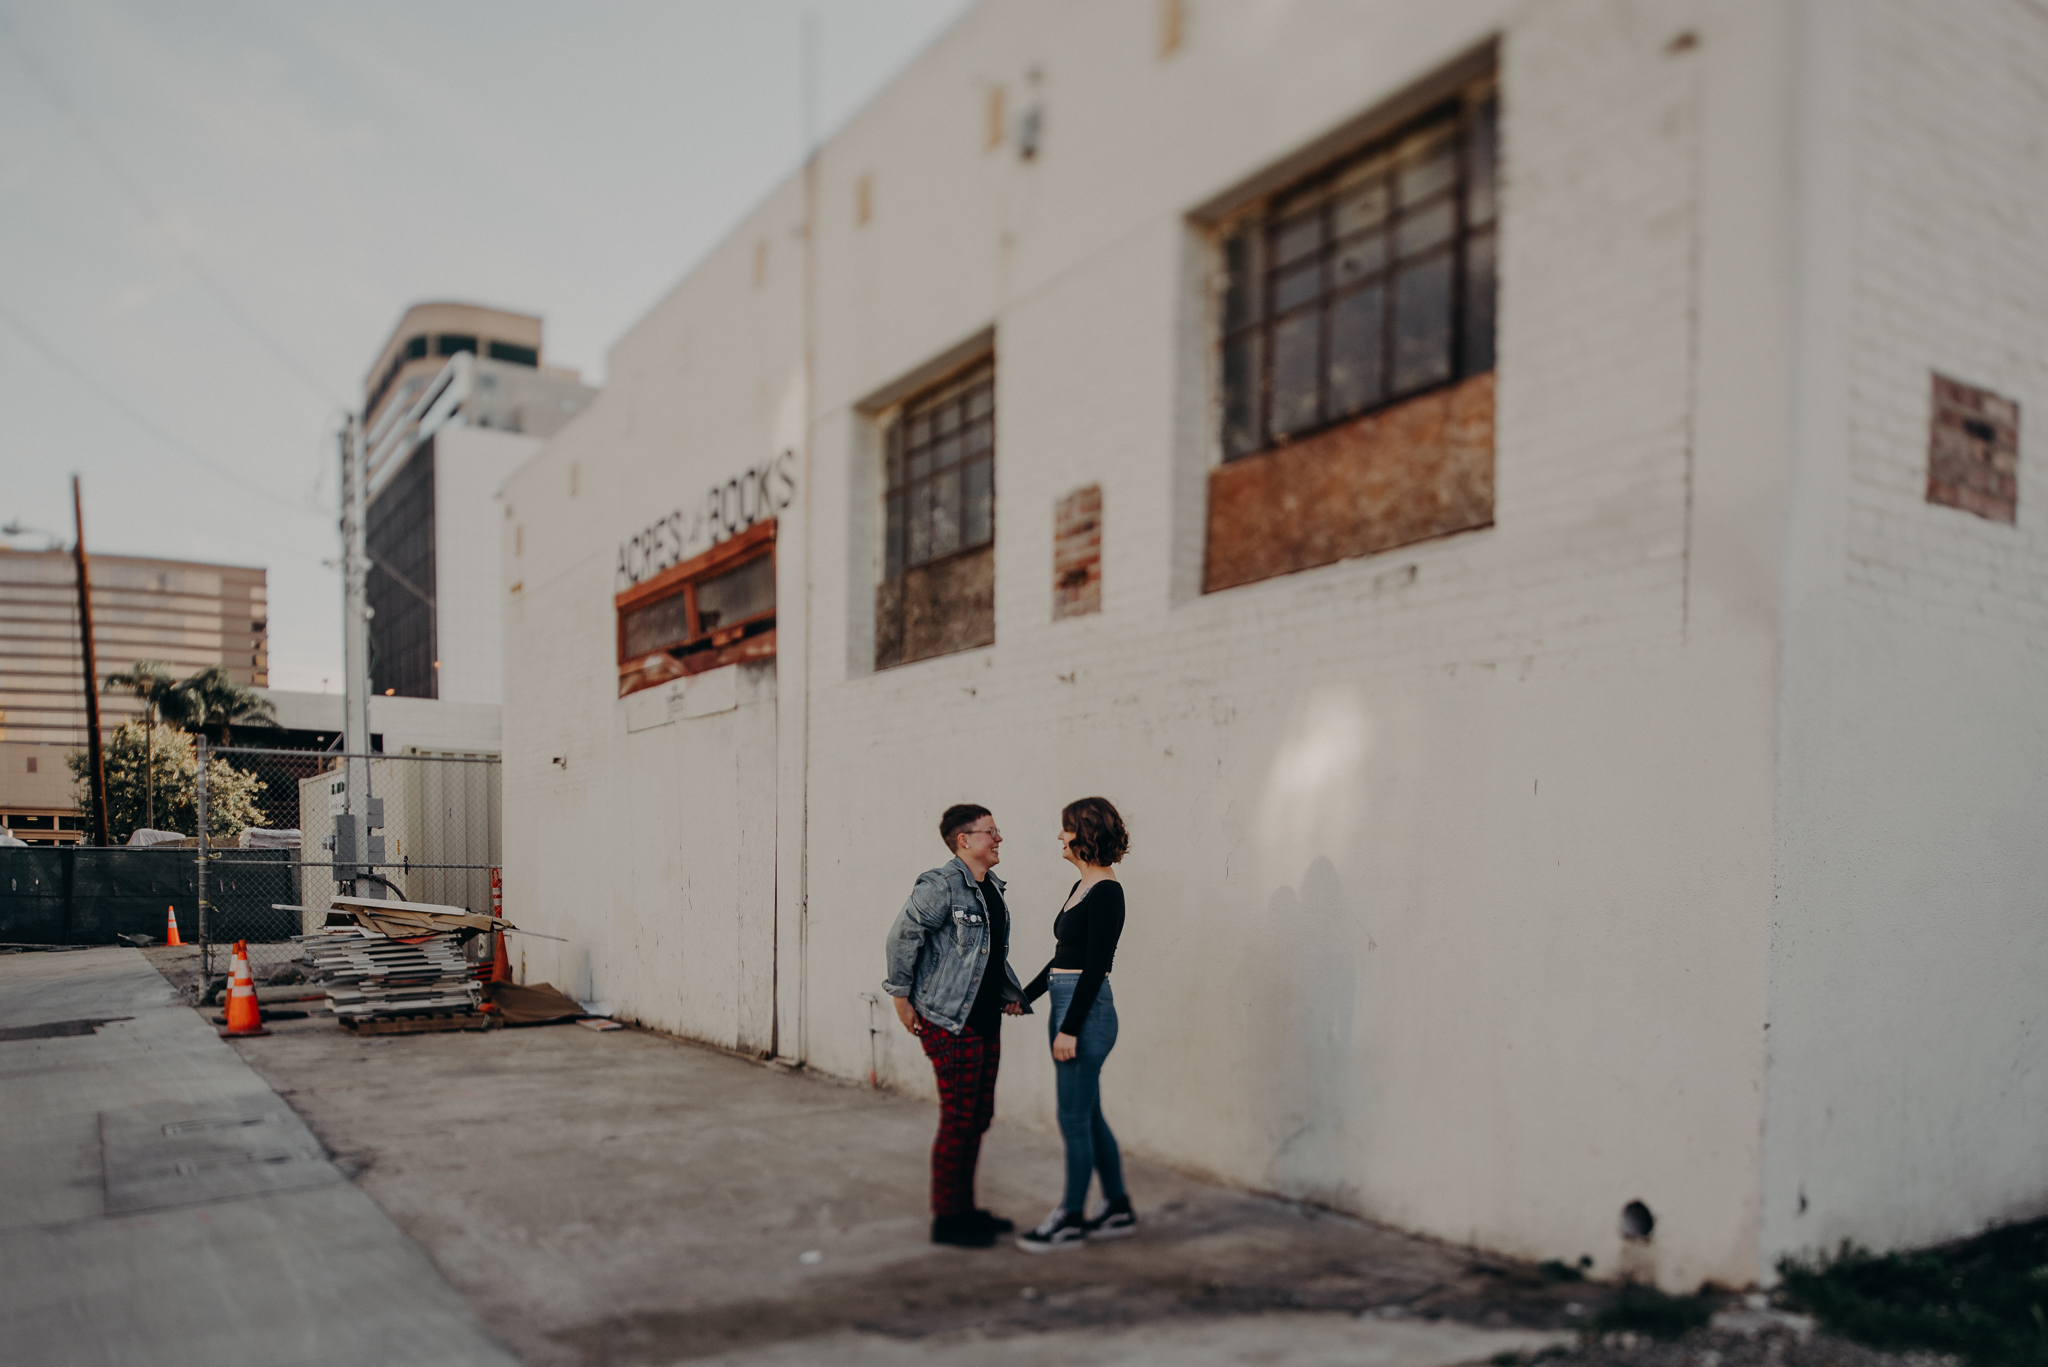 LGBTQ wedding photographer in los angeles - long beach engagement session - isaiahandtaylor.com-29.jpg